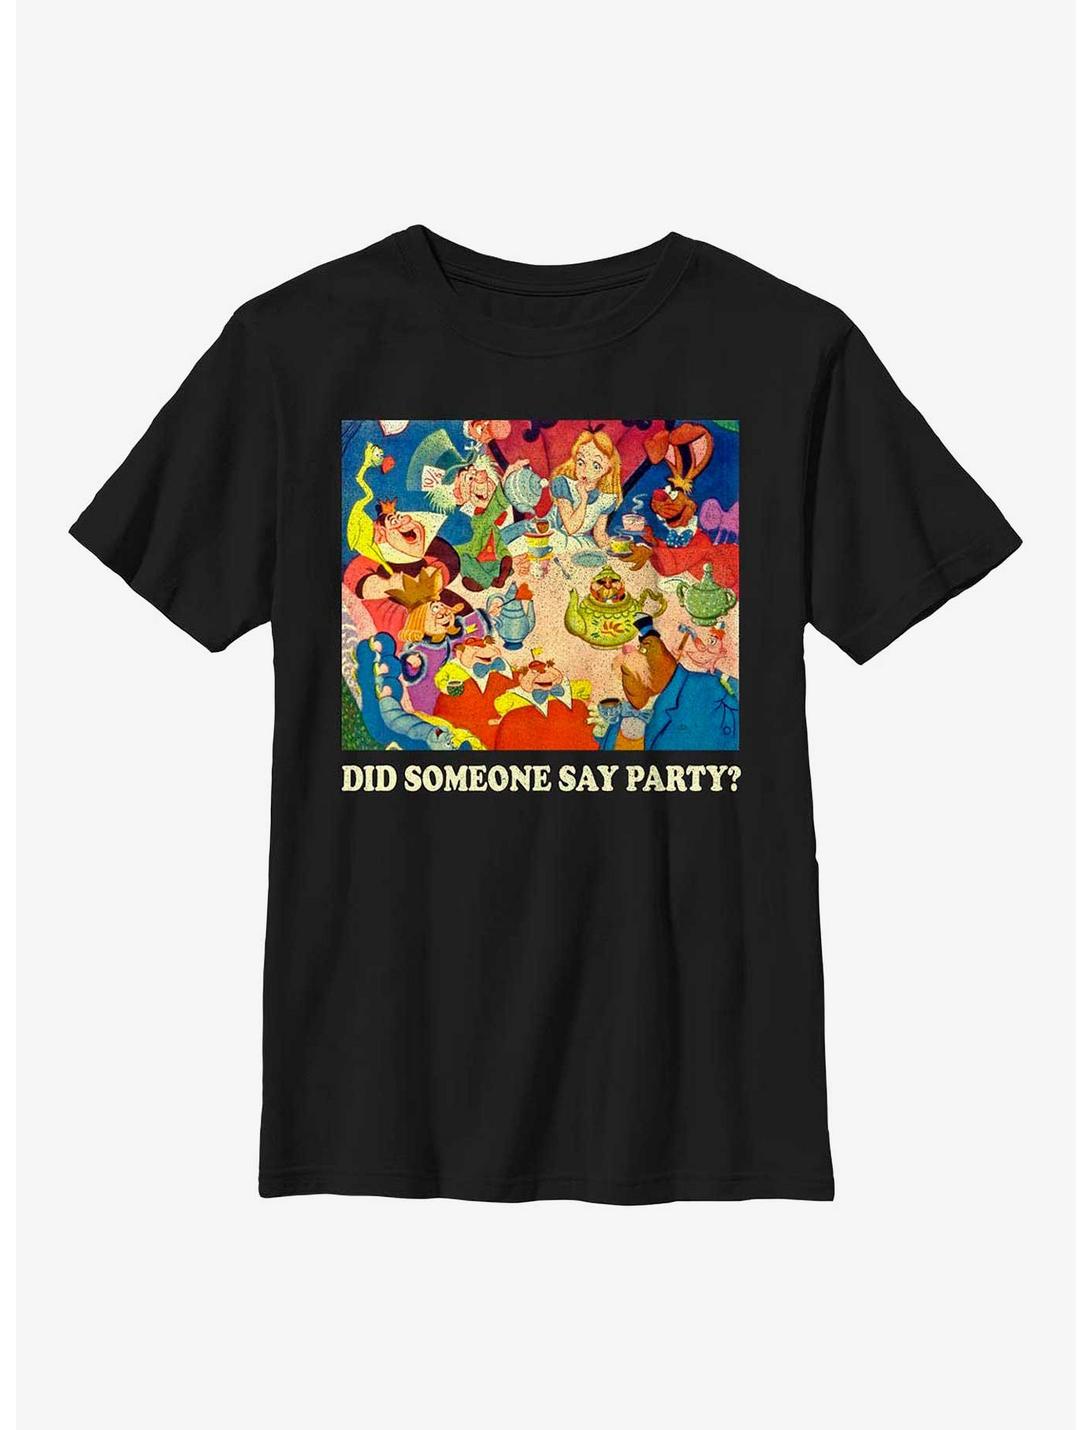 Disney Alice In Wonderland Did Someone Say Party? Youth T-Shirt, BLACK, hi-res